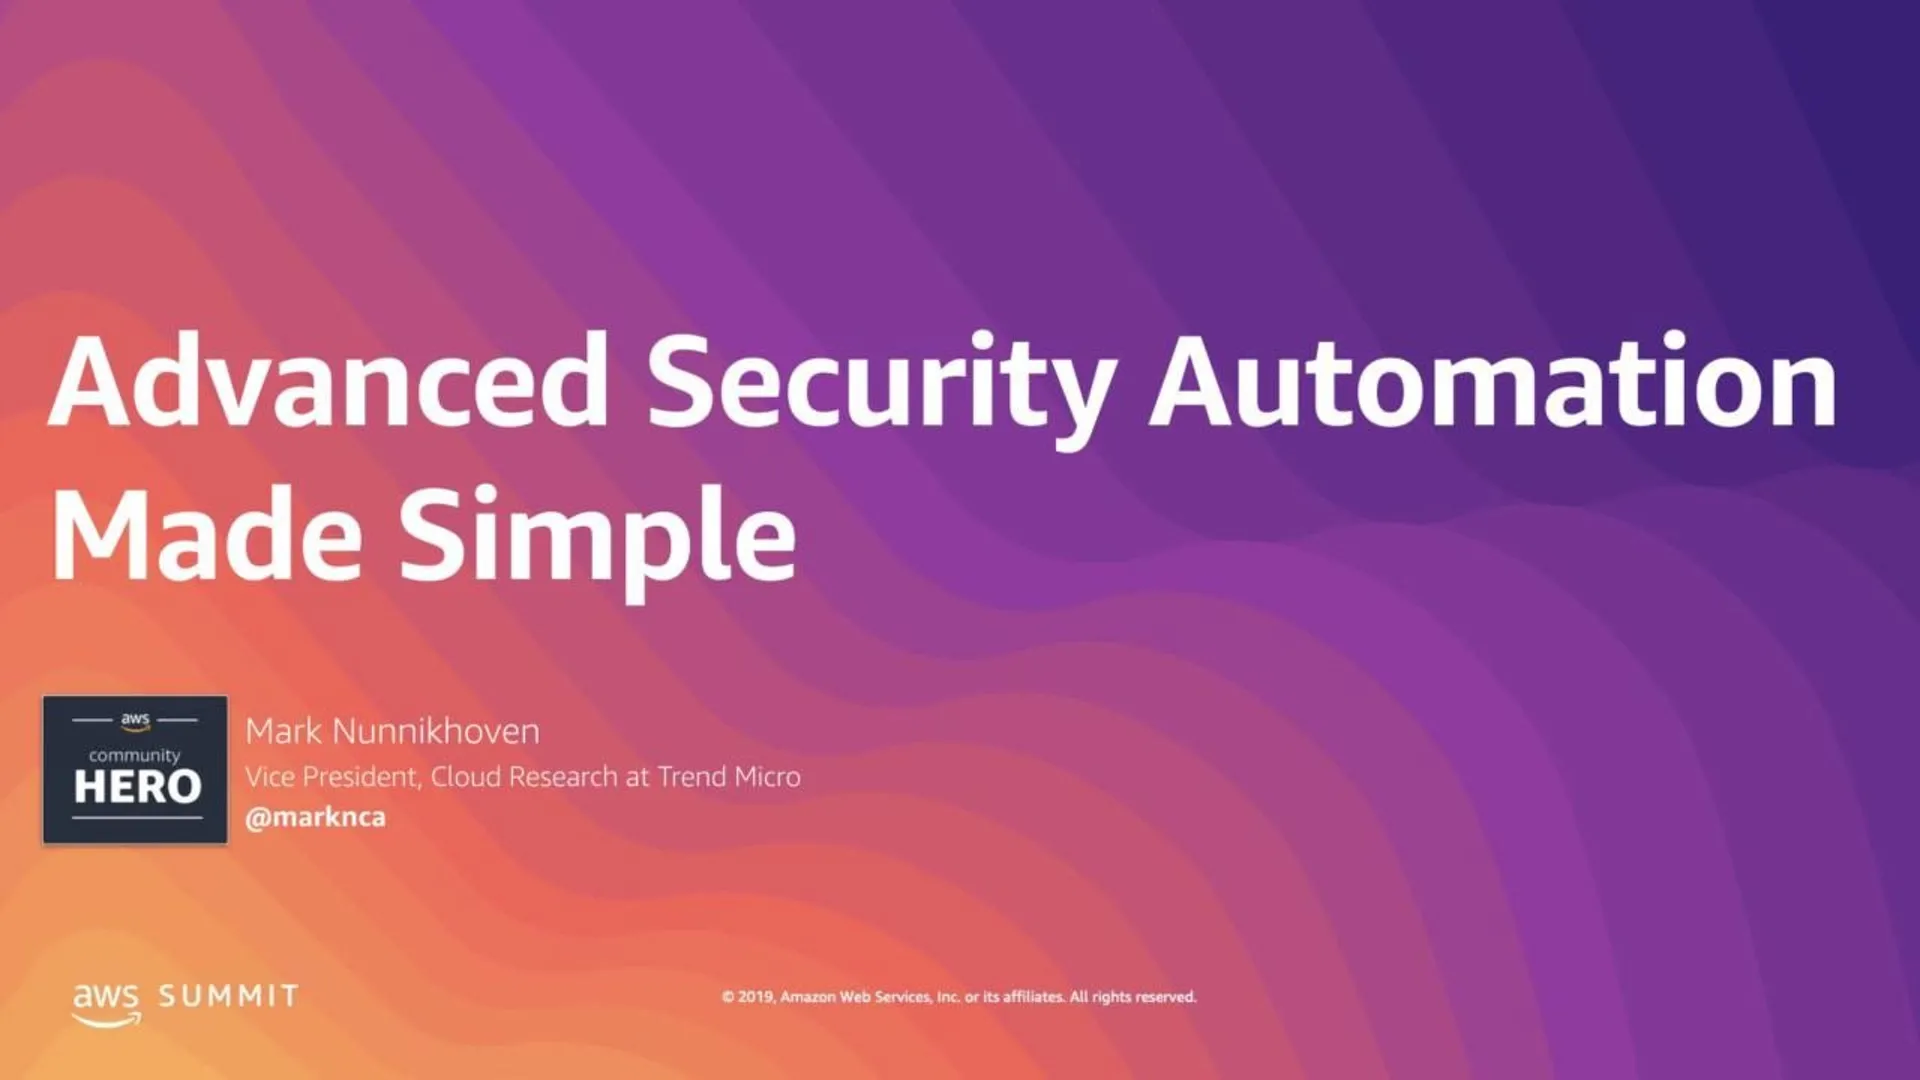 Advanced Security Automation Made Simple